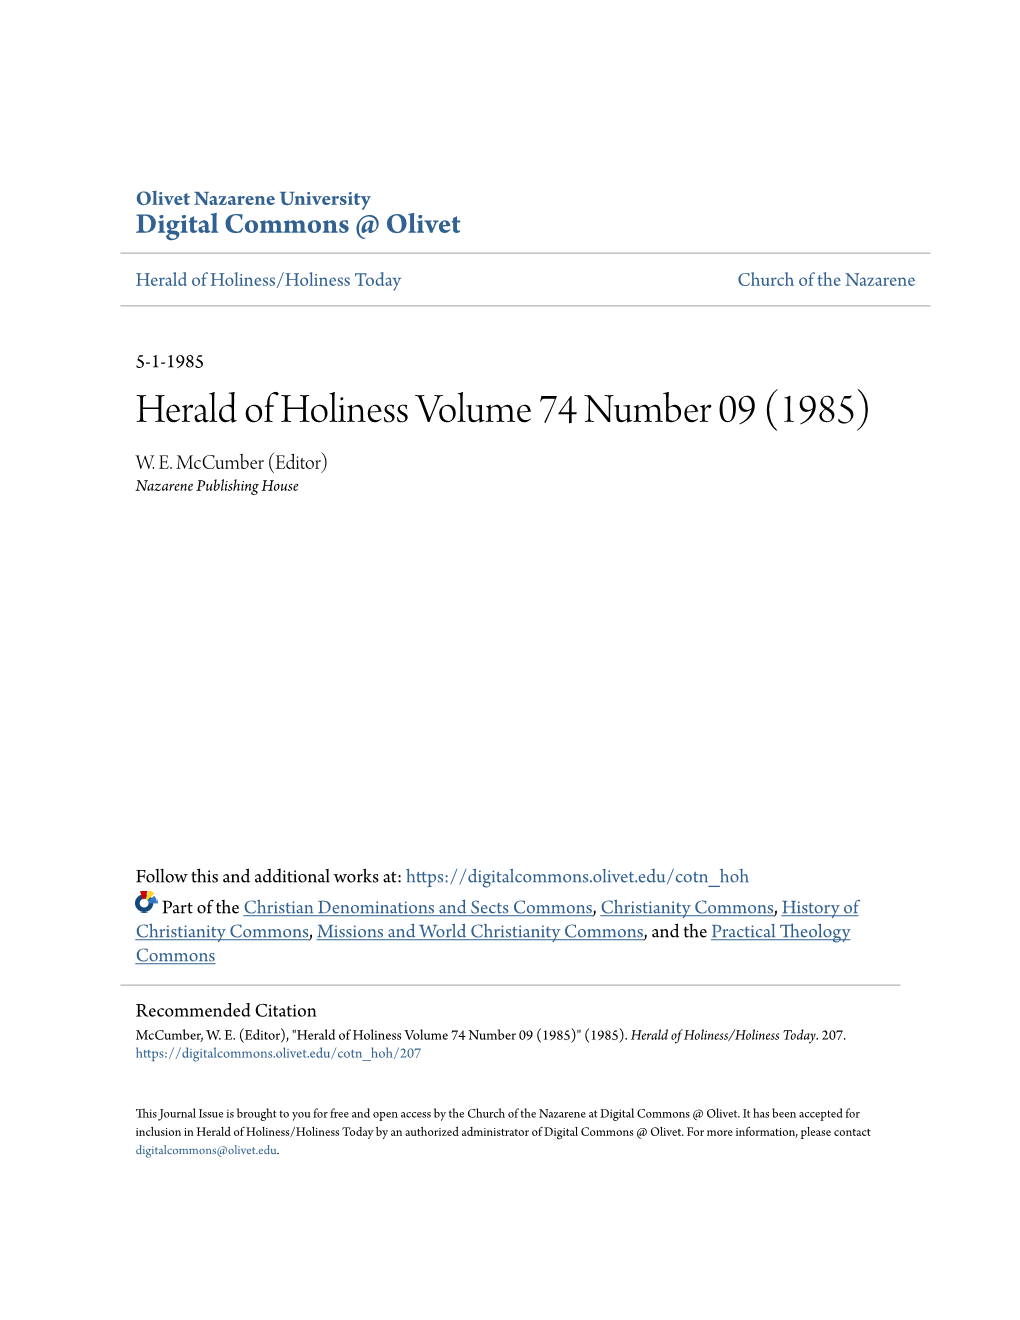 Herald of Holiness Volume 74 Number 09 (1985) W